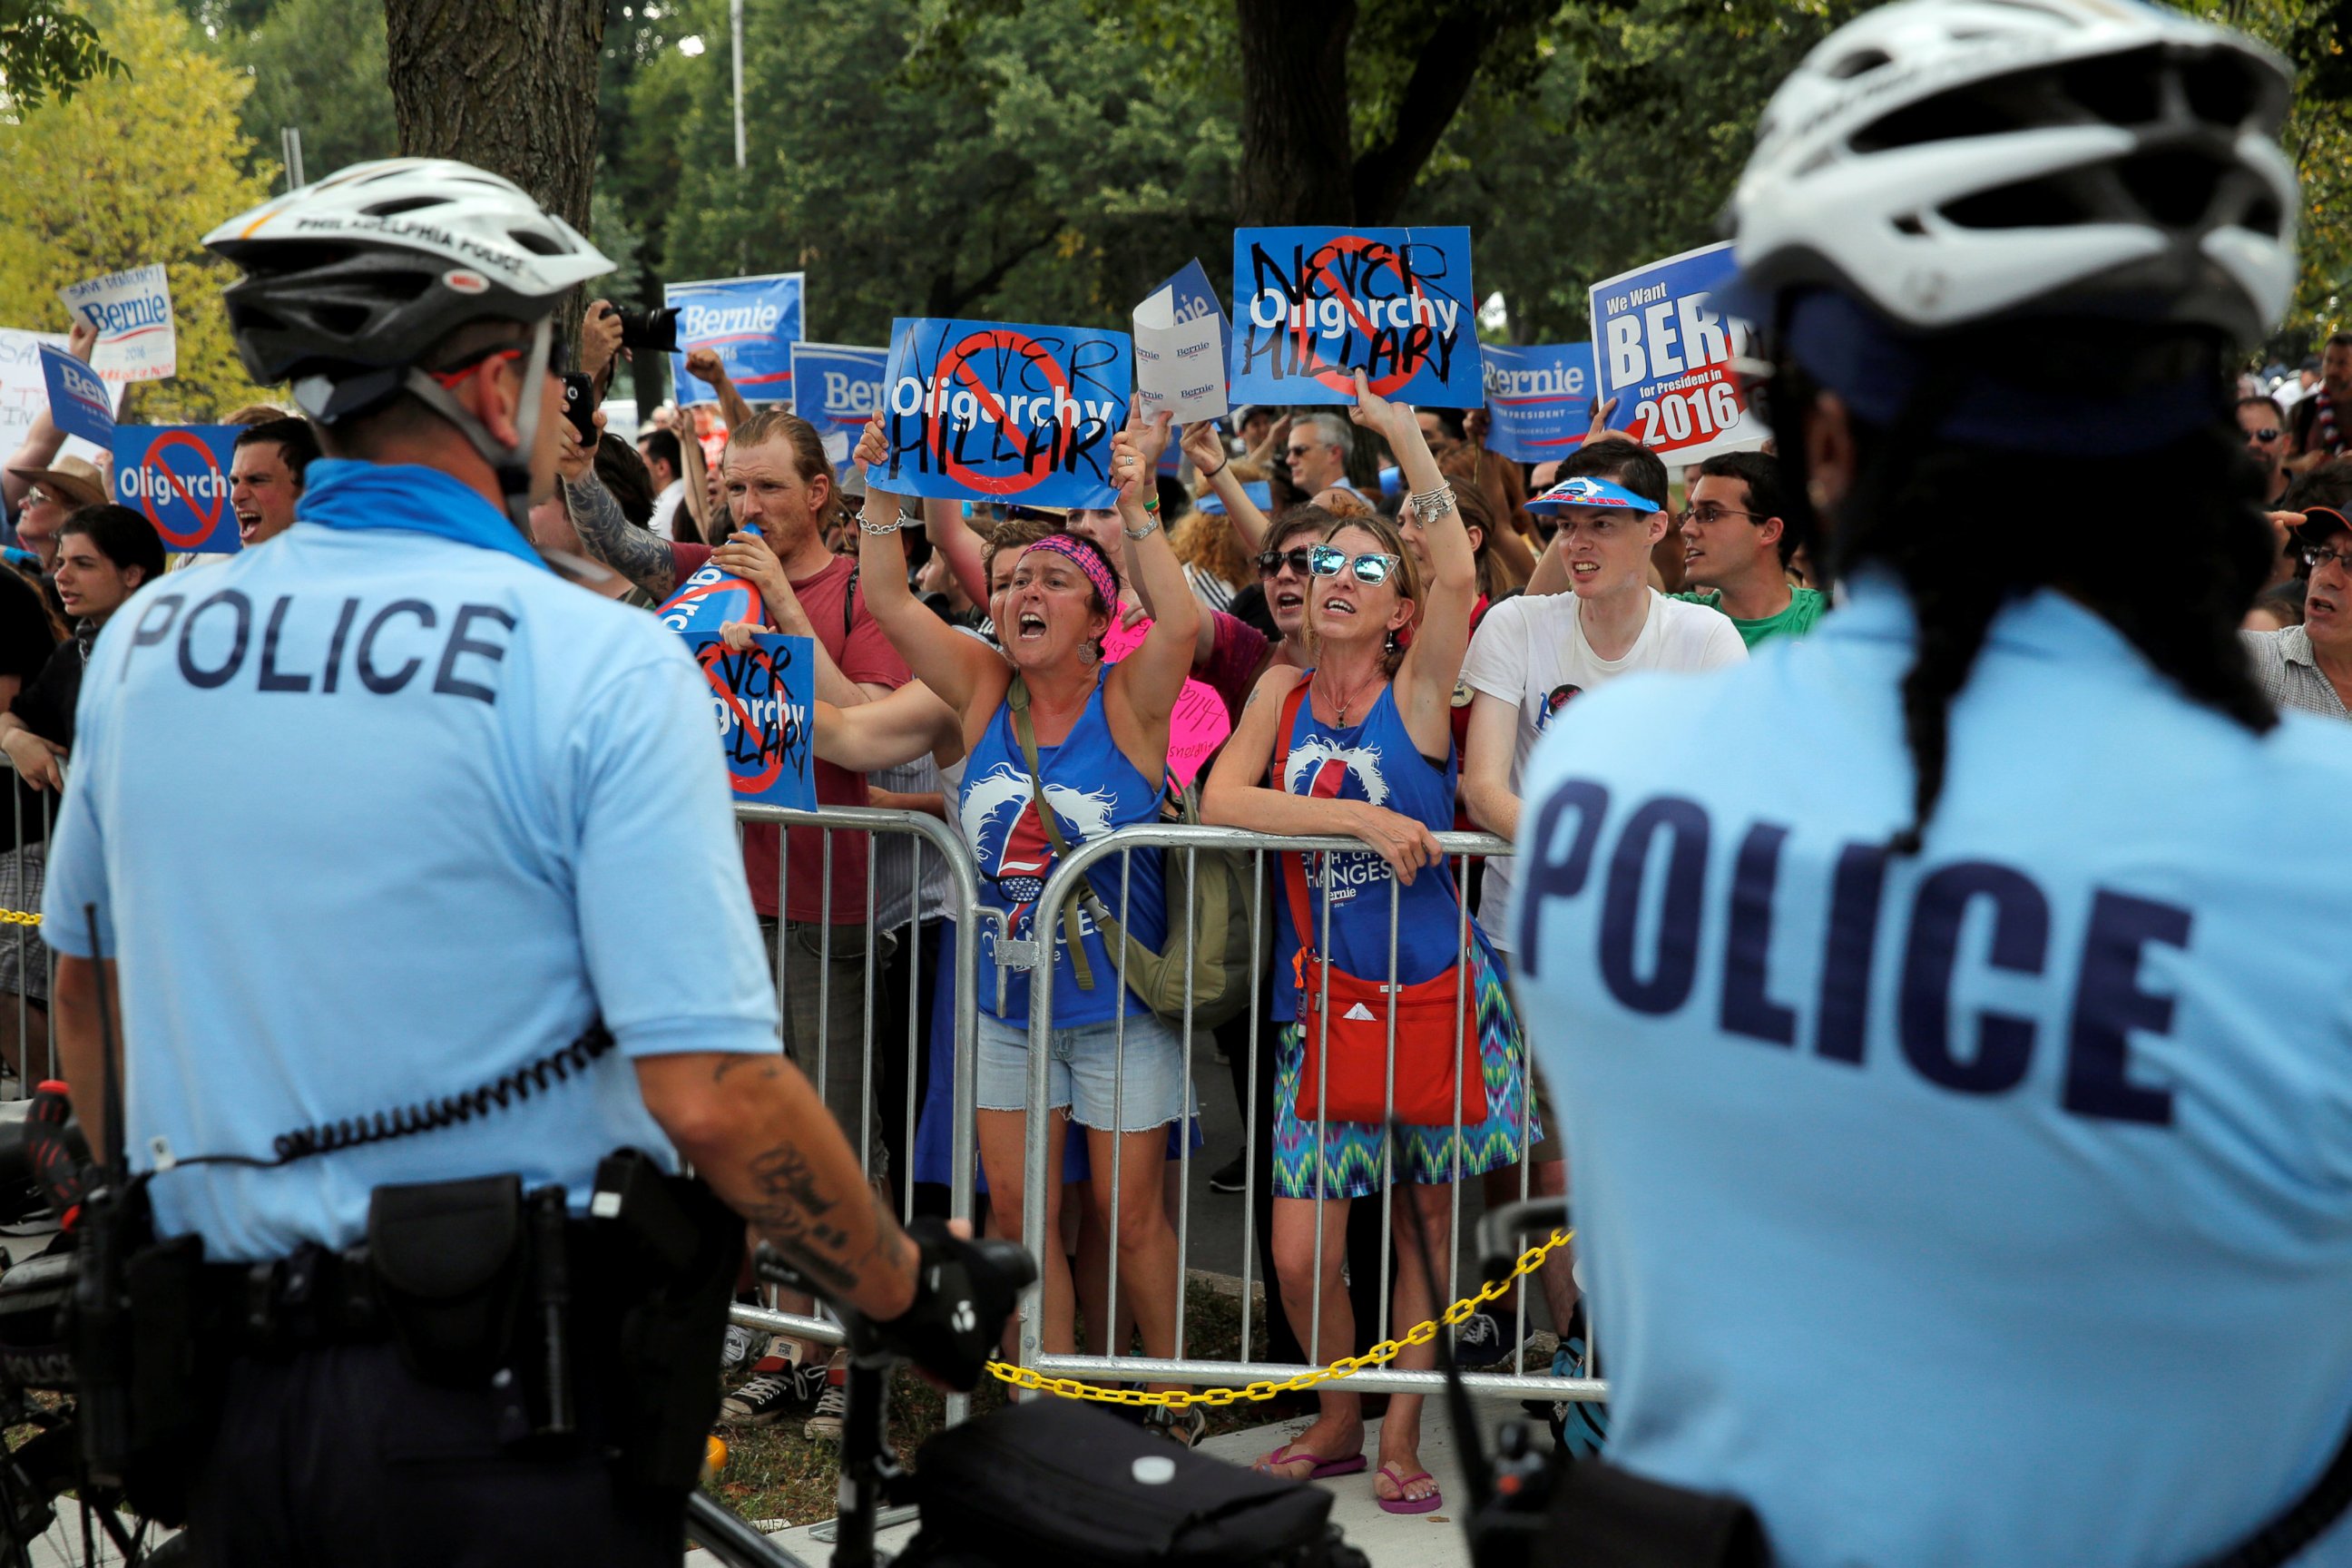 PHOTO: Bernie Sanders supporters yell across a police line during a protest at the Democratic National Convention in Philadelphia, July 25, 2016. 